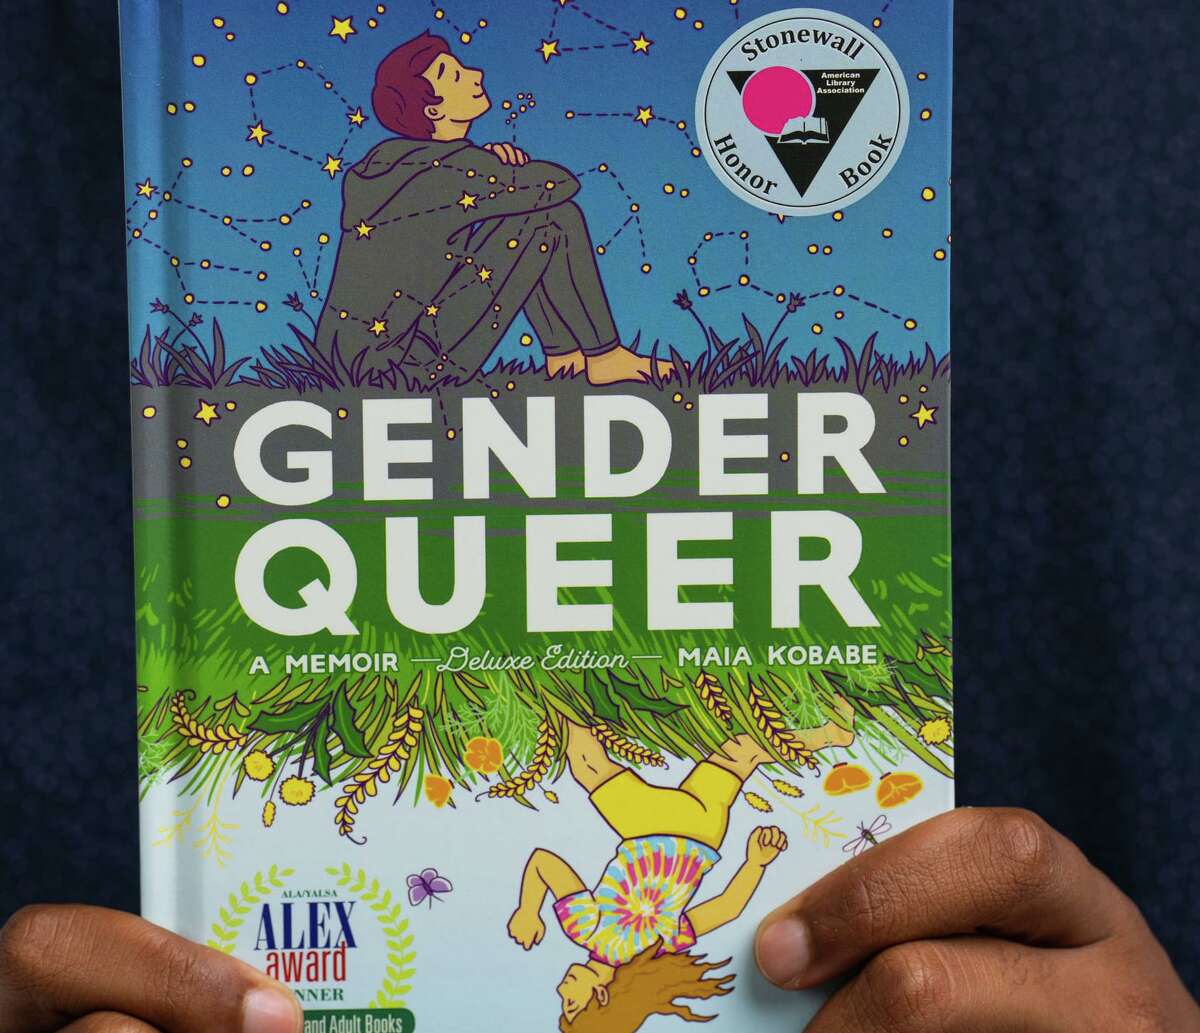 “Gender Queer” by Maia Kobabe, photographed on July 19, has stirred up concerns in Greenwich. But there has been no attempt to have it removed from Greenwich Library’s collection.